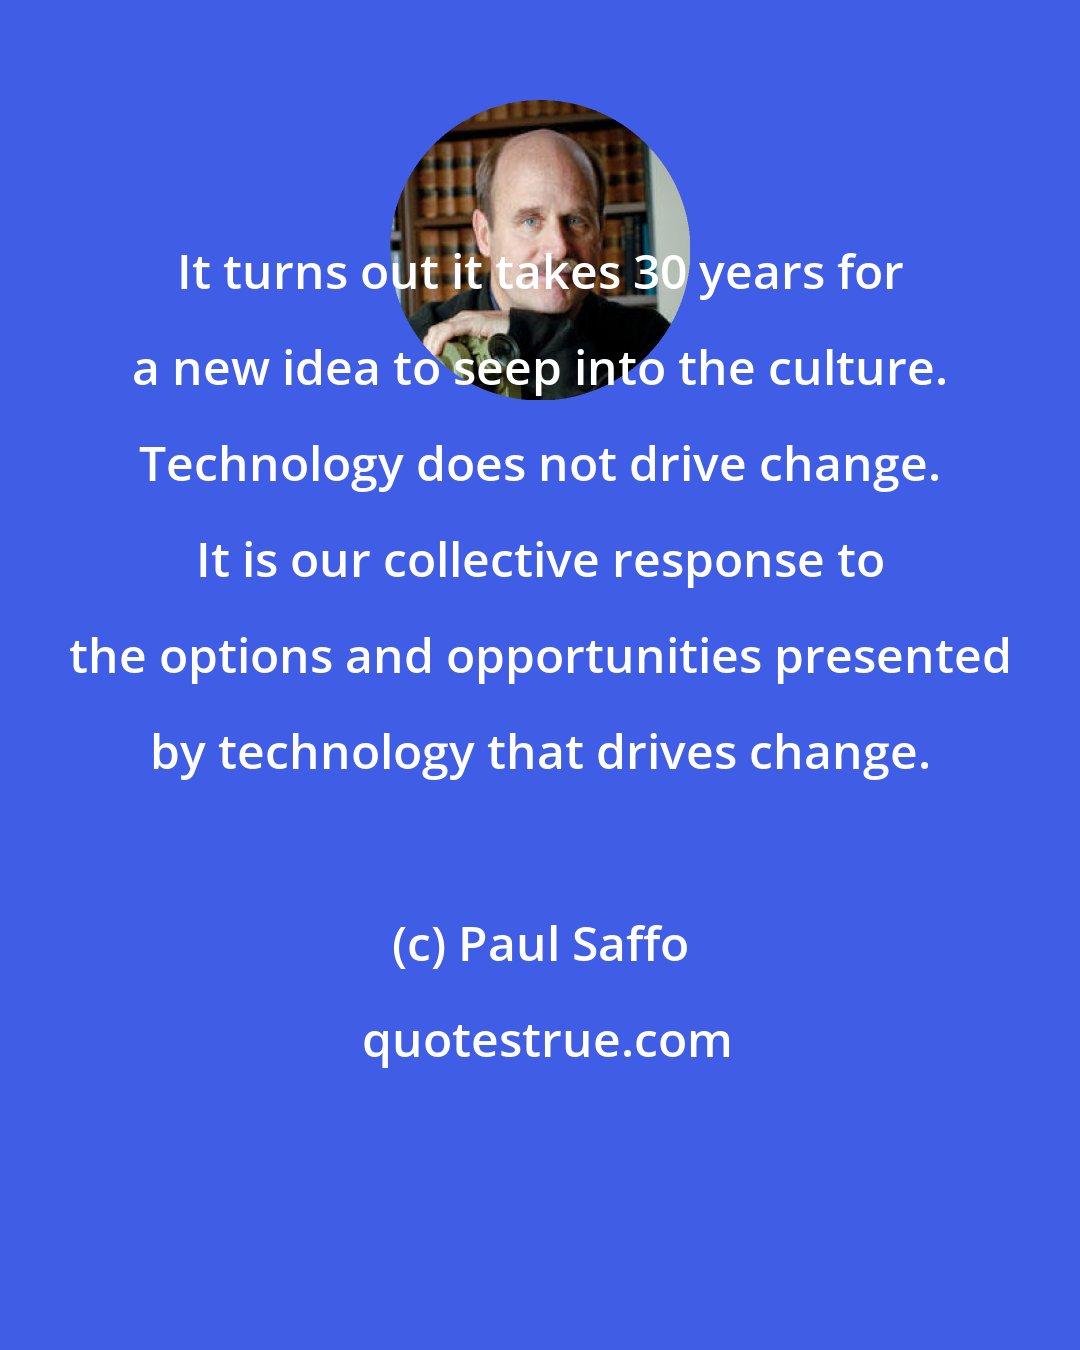 Paul Saffo: It turns out it takes 30 years for a new idea to seep into the culture. Technology does not drive change. It is our collective response to the options and opportunities presented by technology that drives change.